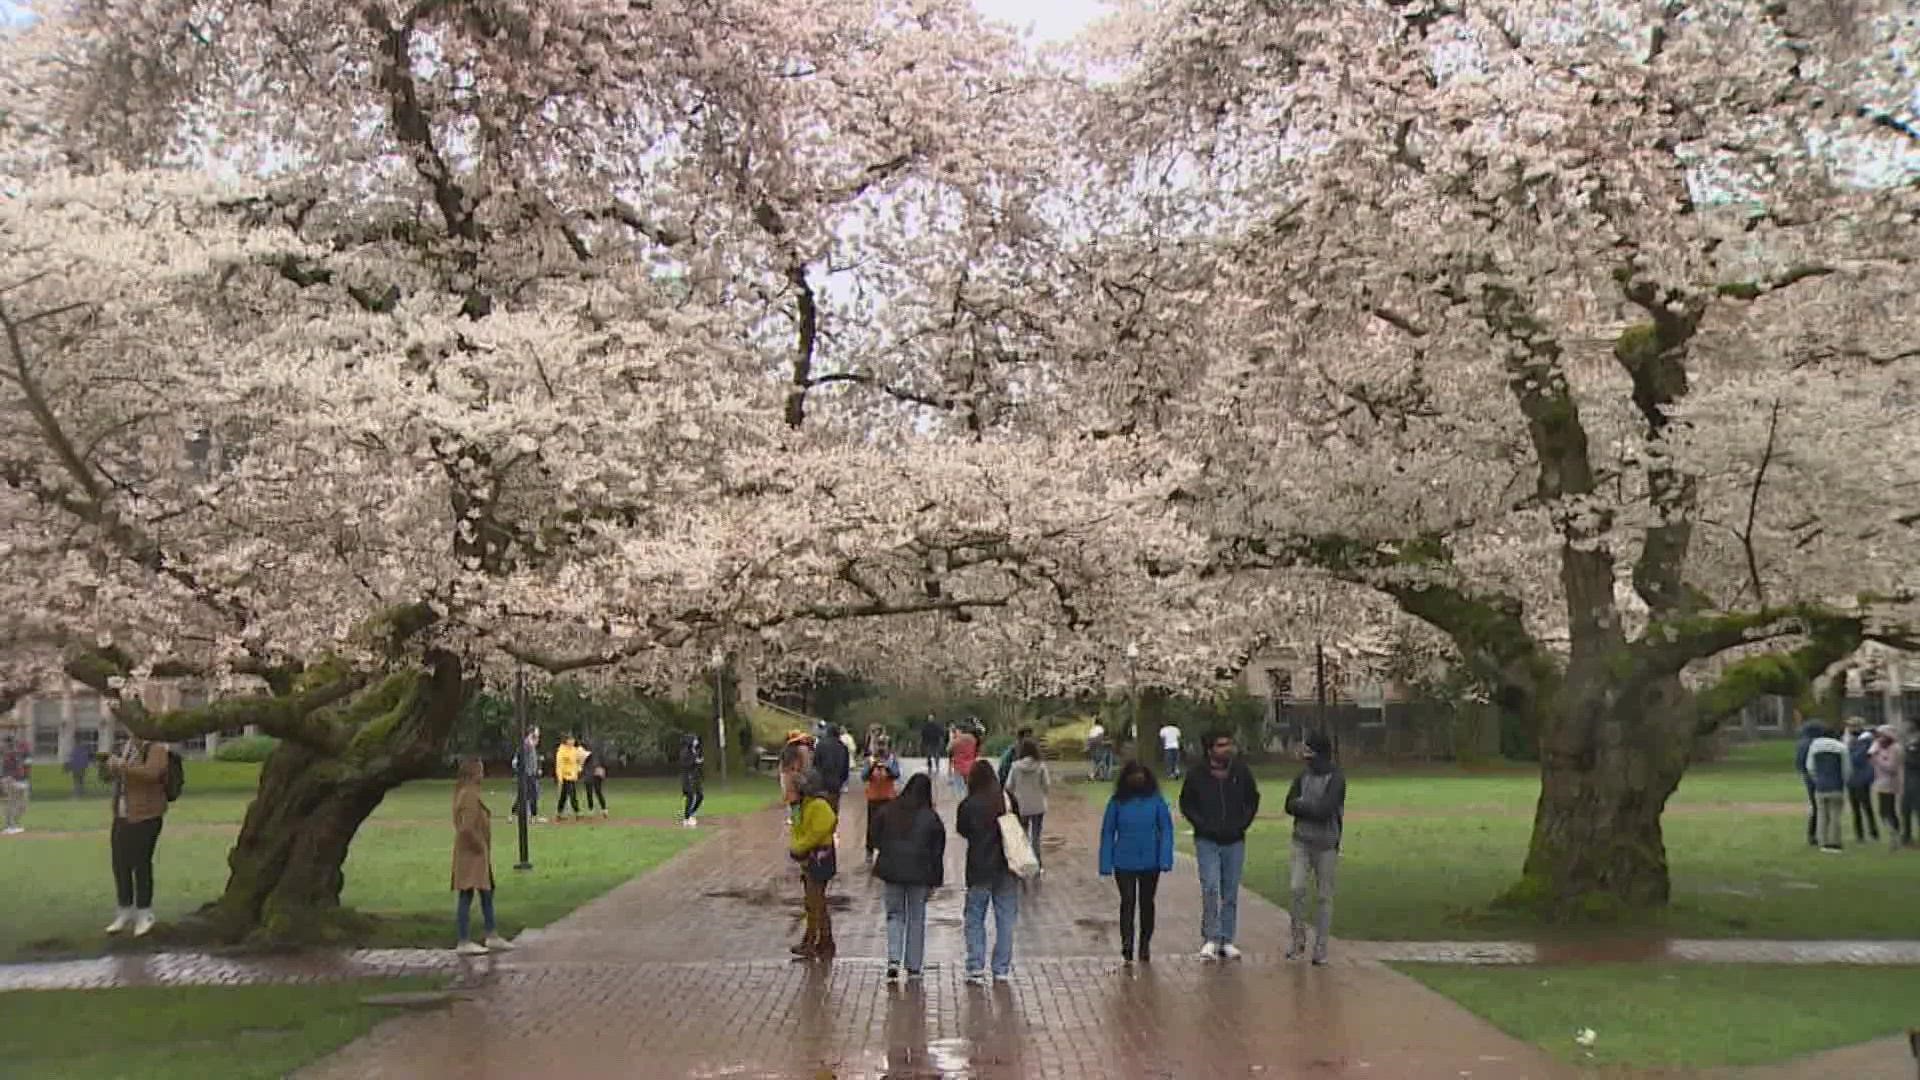 What to know before visiting UW's cherry blossoms in the Quad